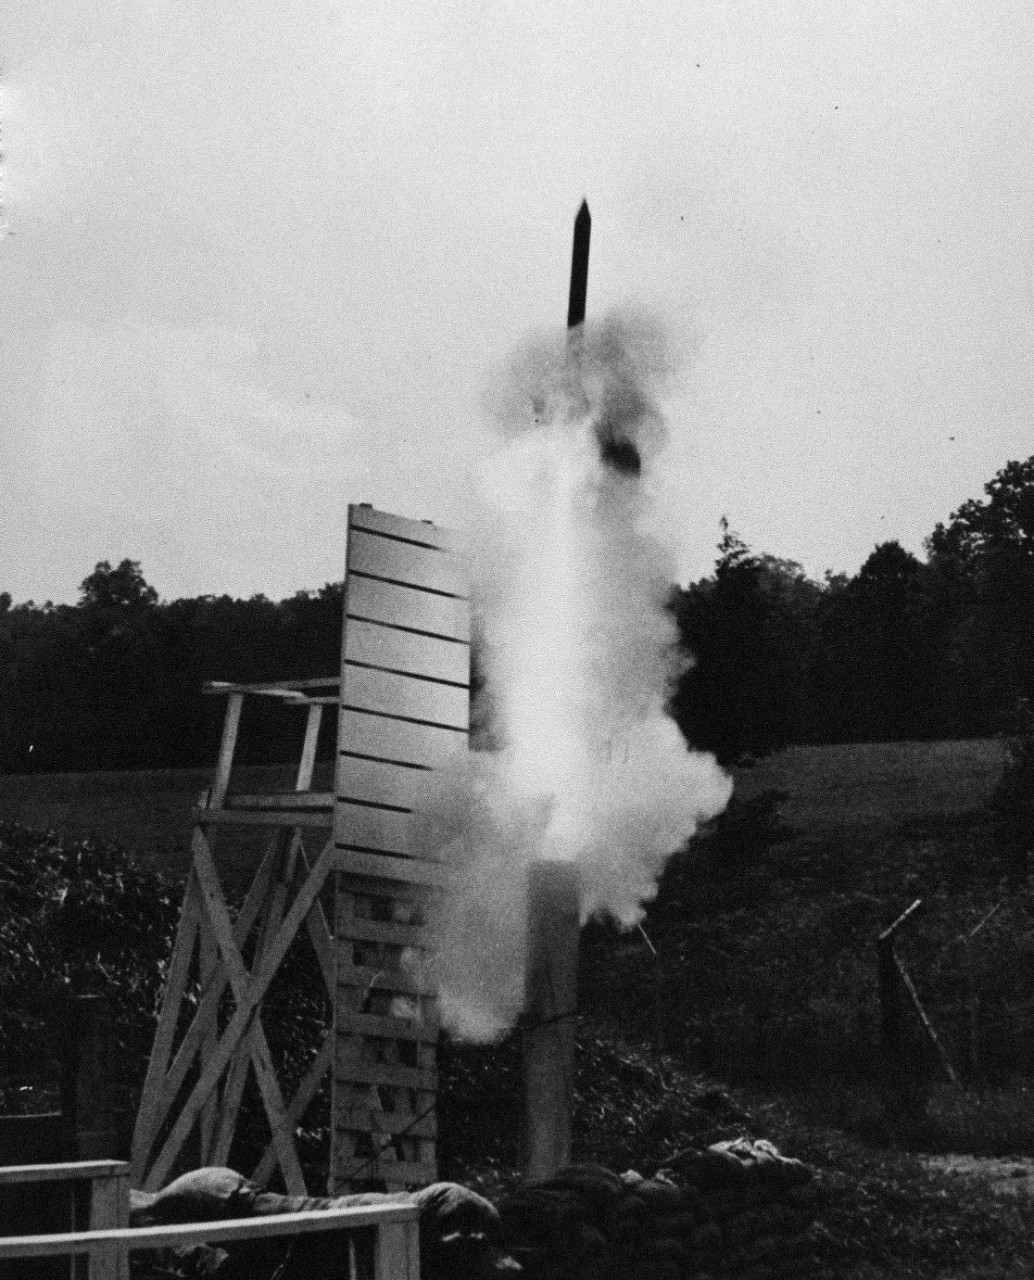 330-PS-9191 (USN 7109278)   U.S. Navy’s Argas rocket being fired, 15 October 1958.  The Argas was a meteoroidal and upper atmospheric research.   Official U.S. Navy photograph, now in the collections of the National Archives.     